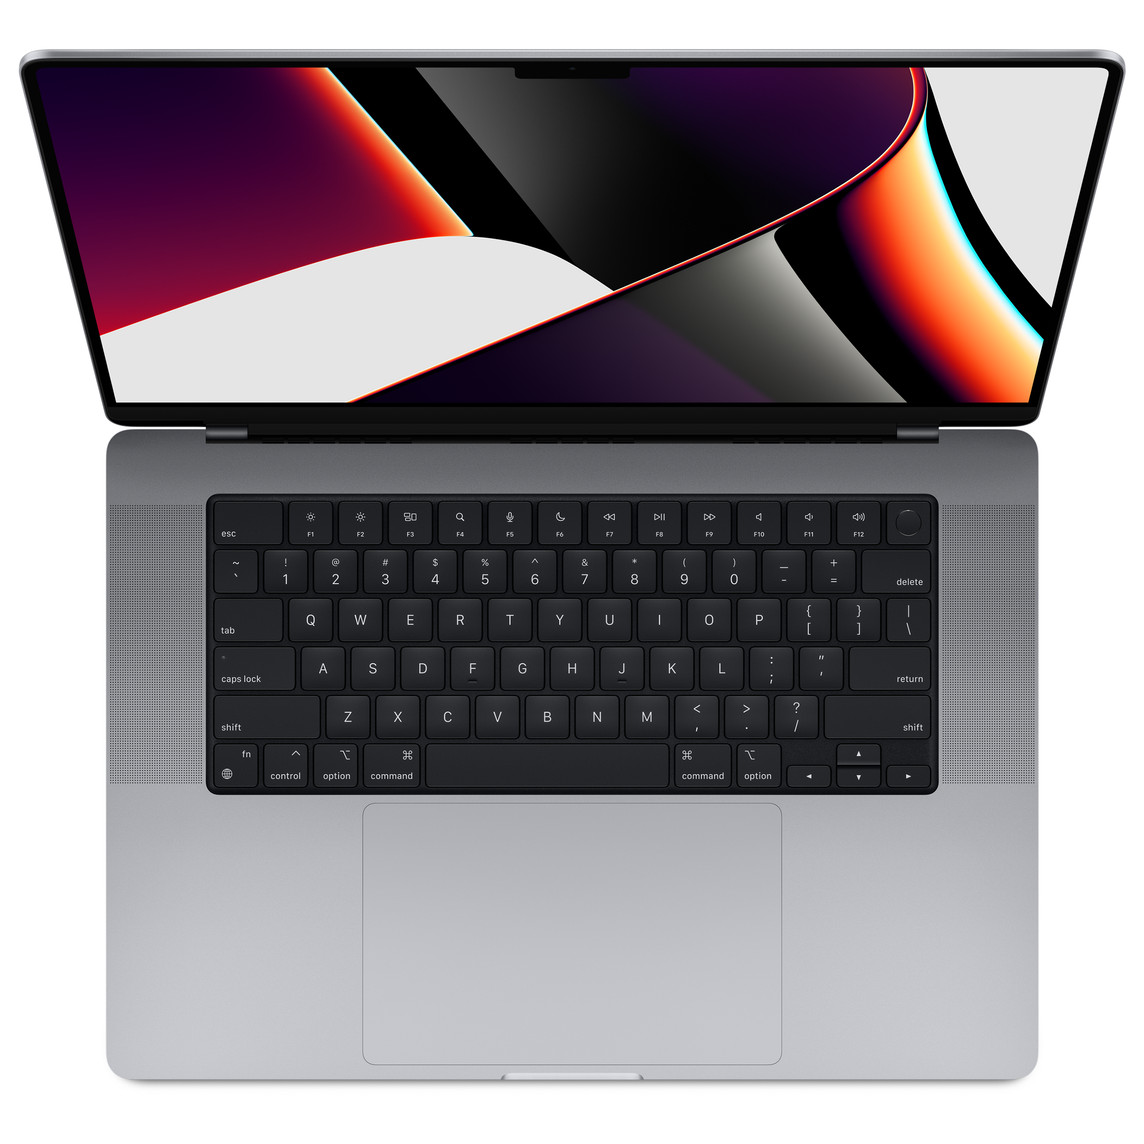 MacBook Pro, open top, display, keyboard with full height function key row and circular Touch ID button, trackpad, Space Grey